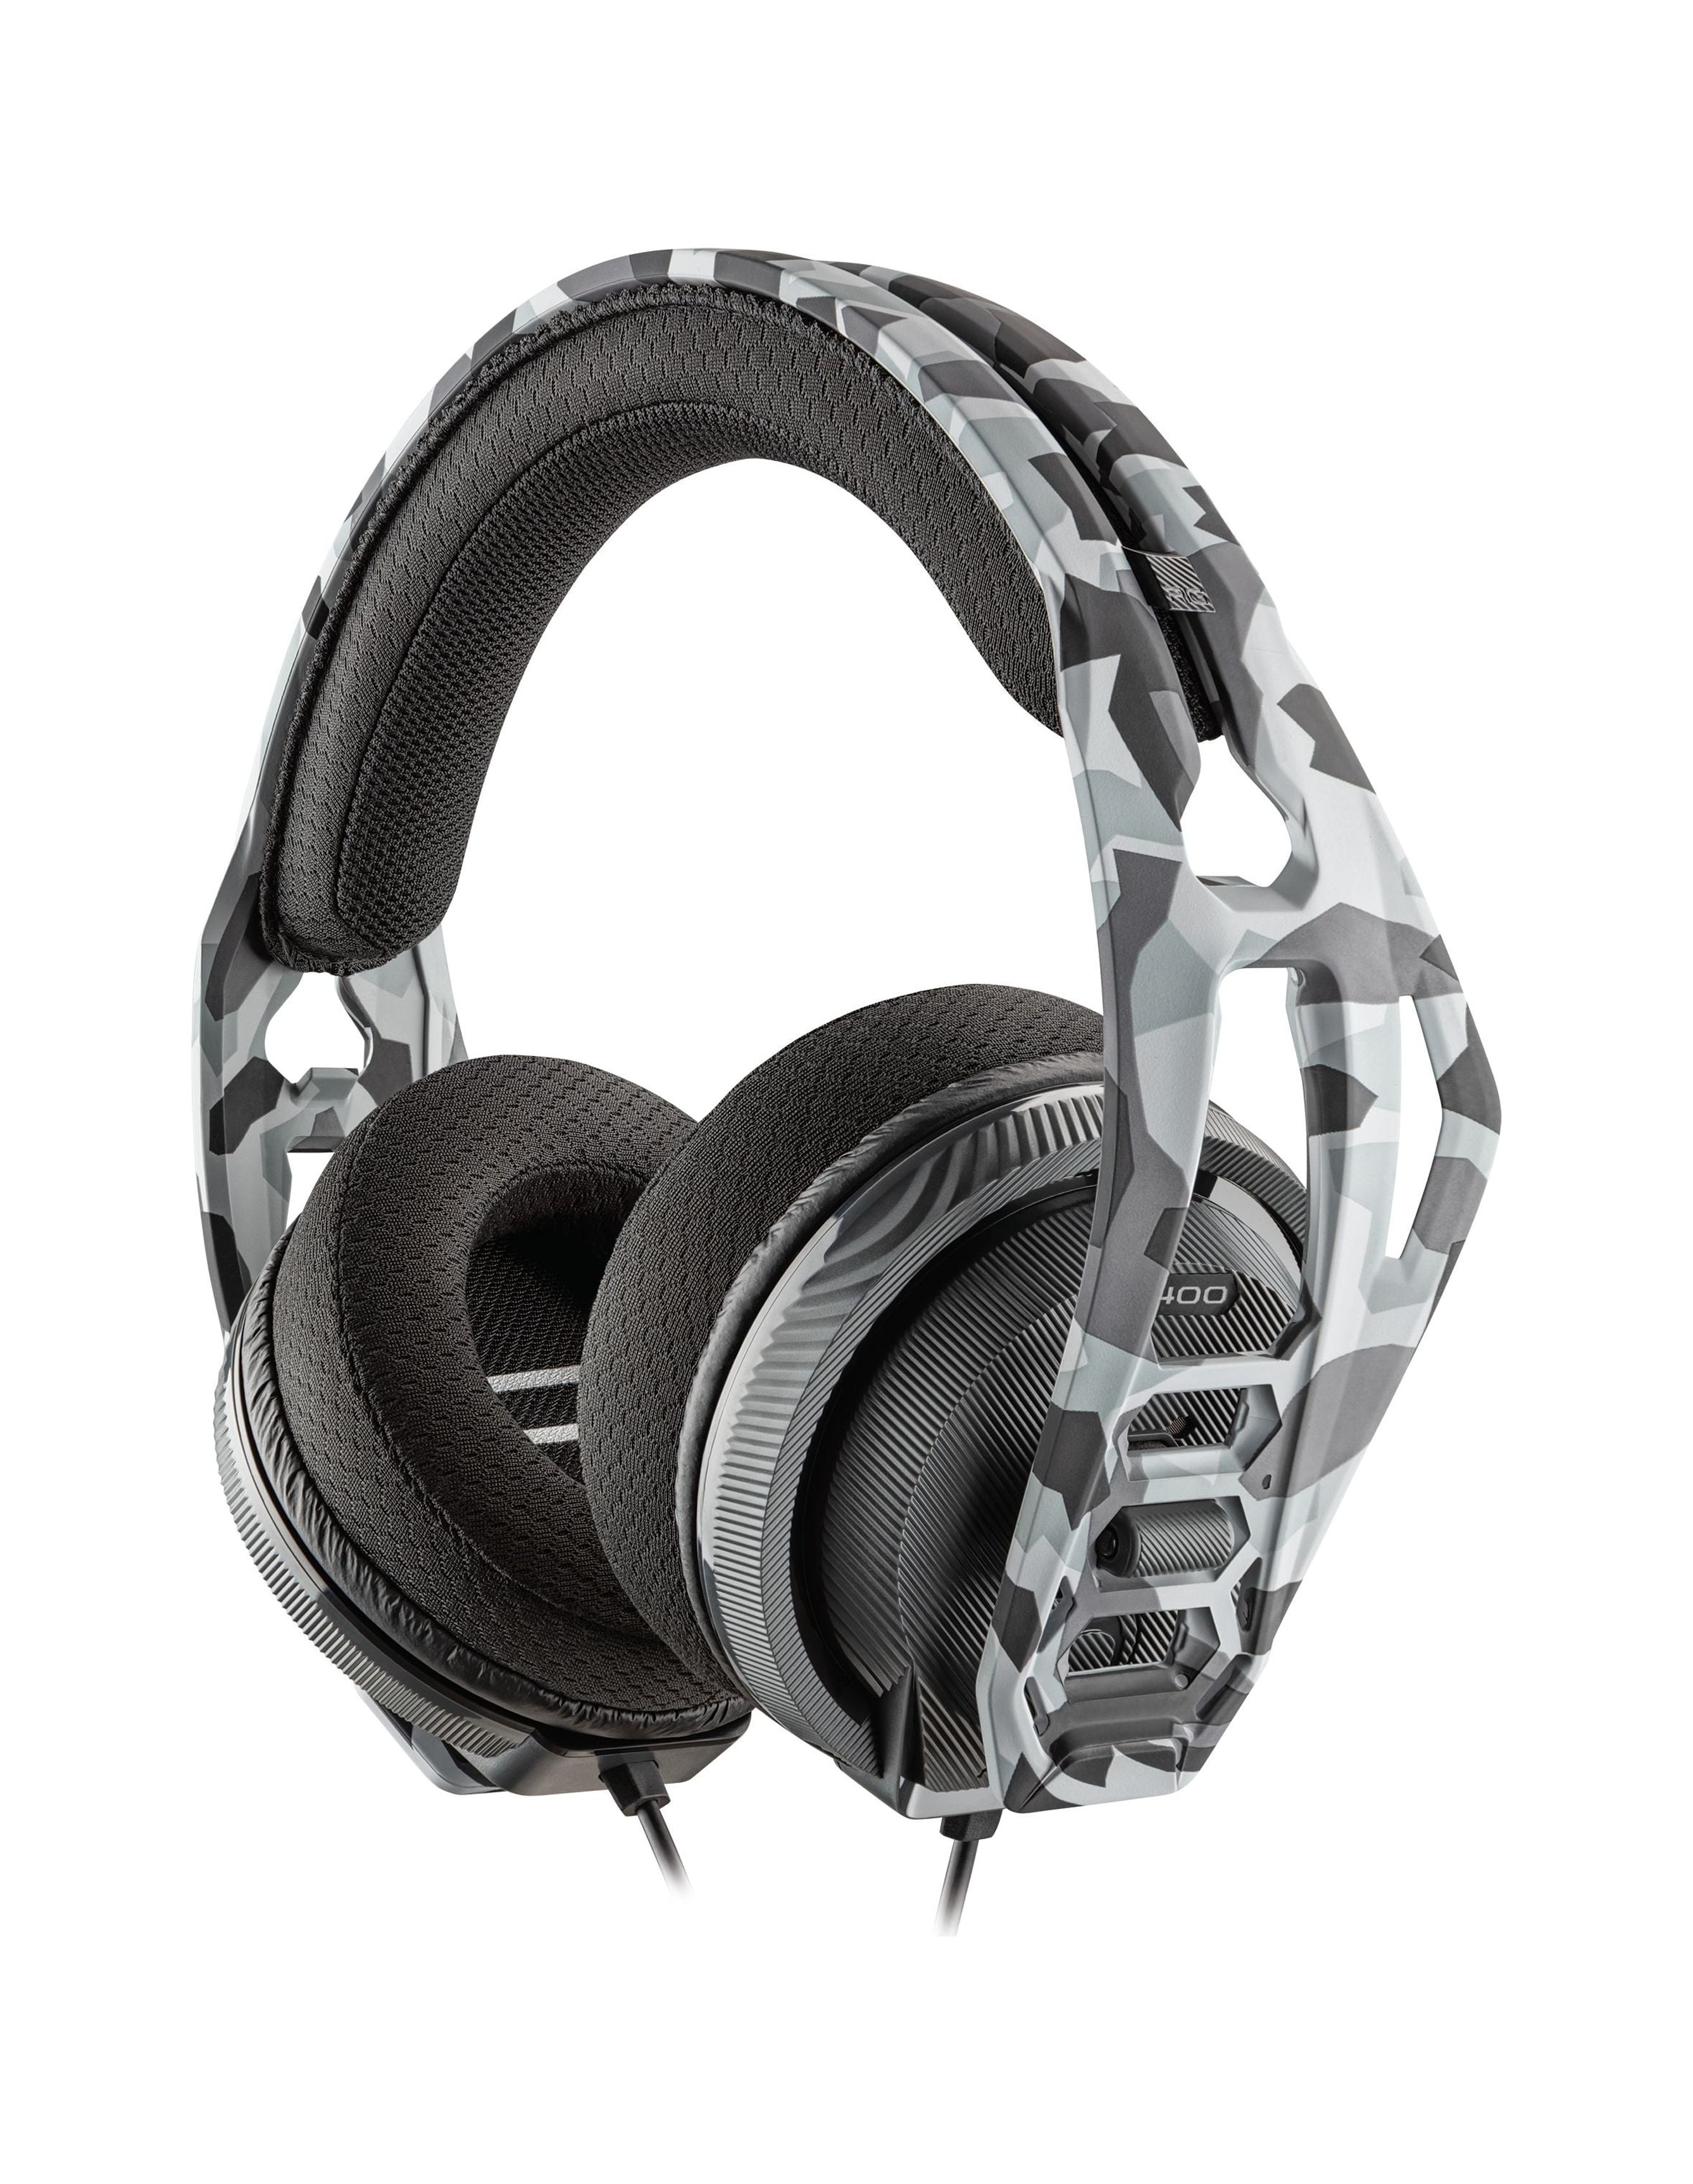 RIG 400HS Camo Stereo Gaming Headset for PlayStation 4 - image 1 of 6